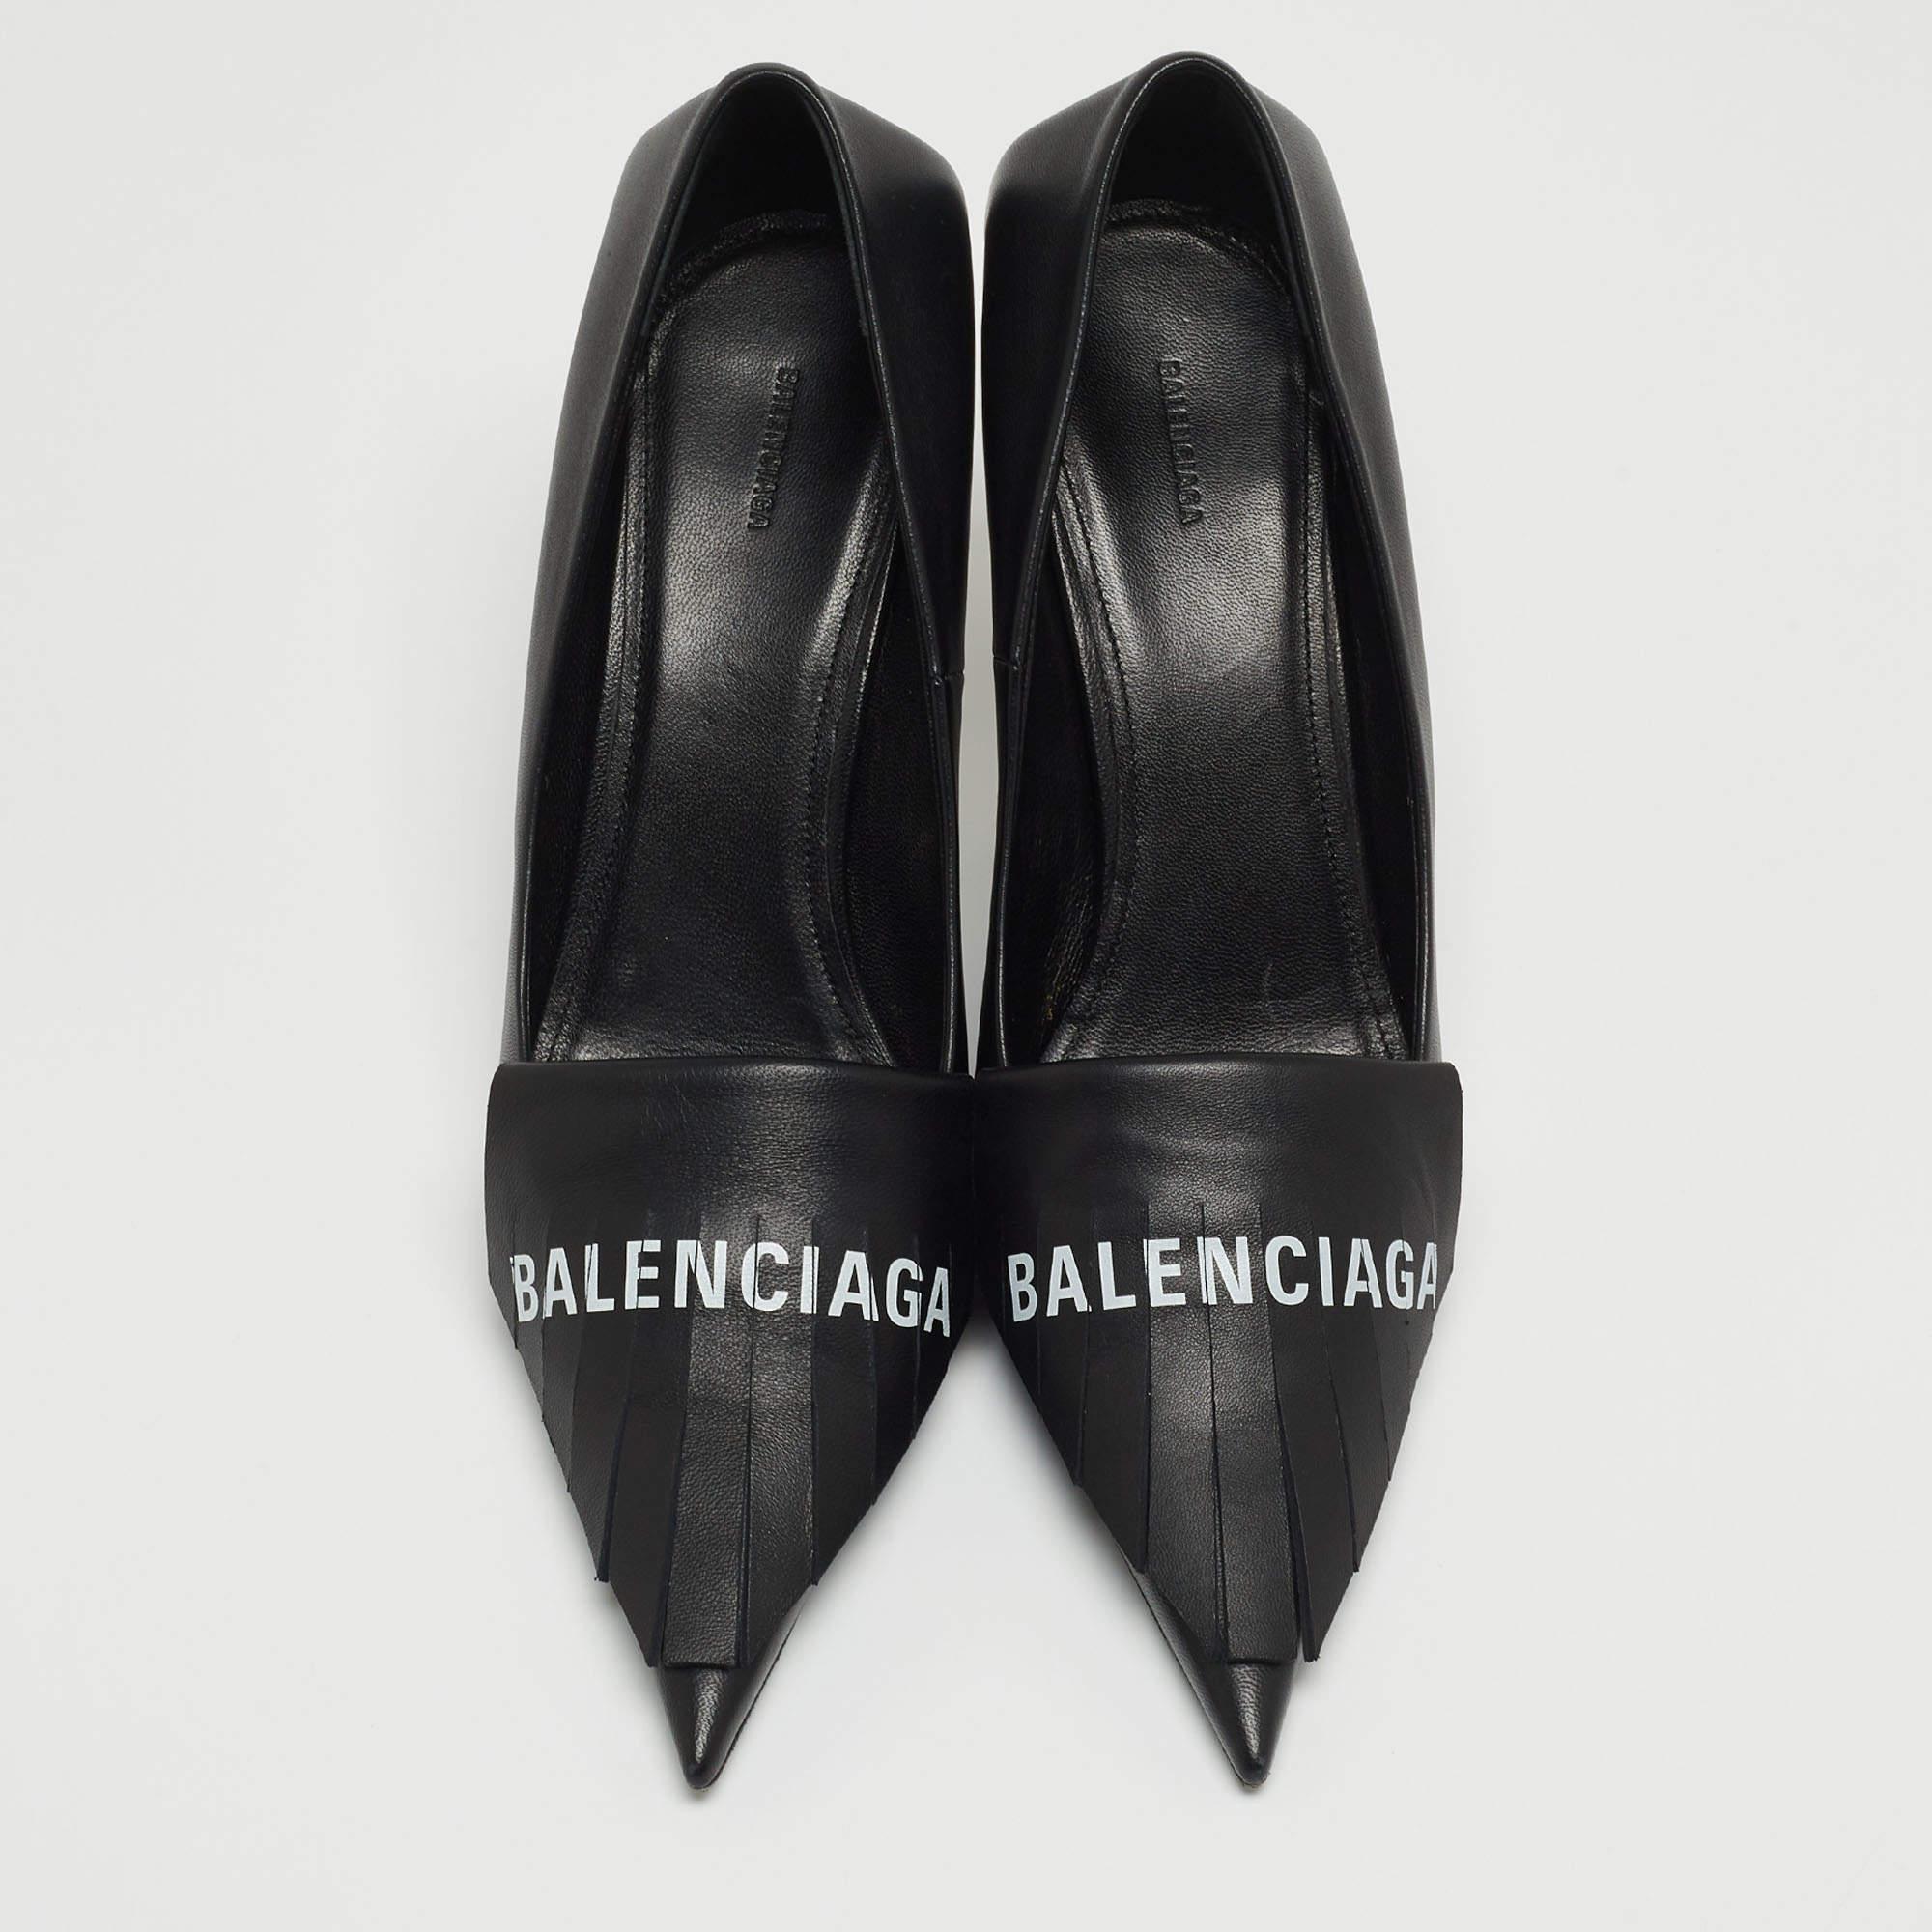 Sleek and sharp, this pair of Balenciaga pumps will complement a variety of outfits in your wardrobe. The leather creation features a black shade. Elevated on 7cm heels, it will take your fashion statement a notch higher.

Includes: Original